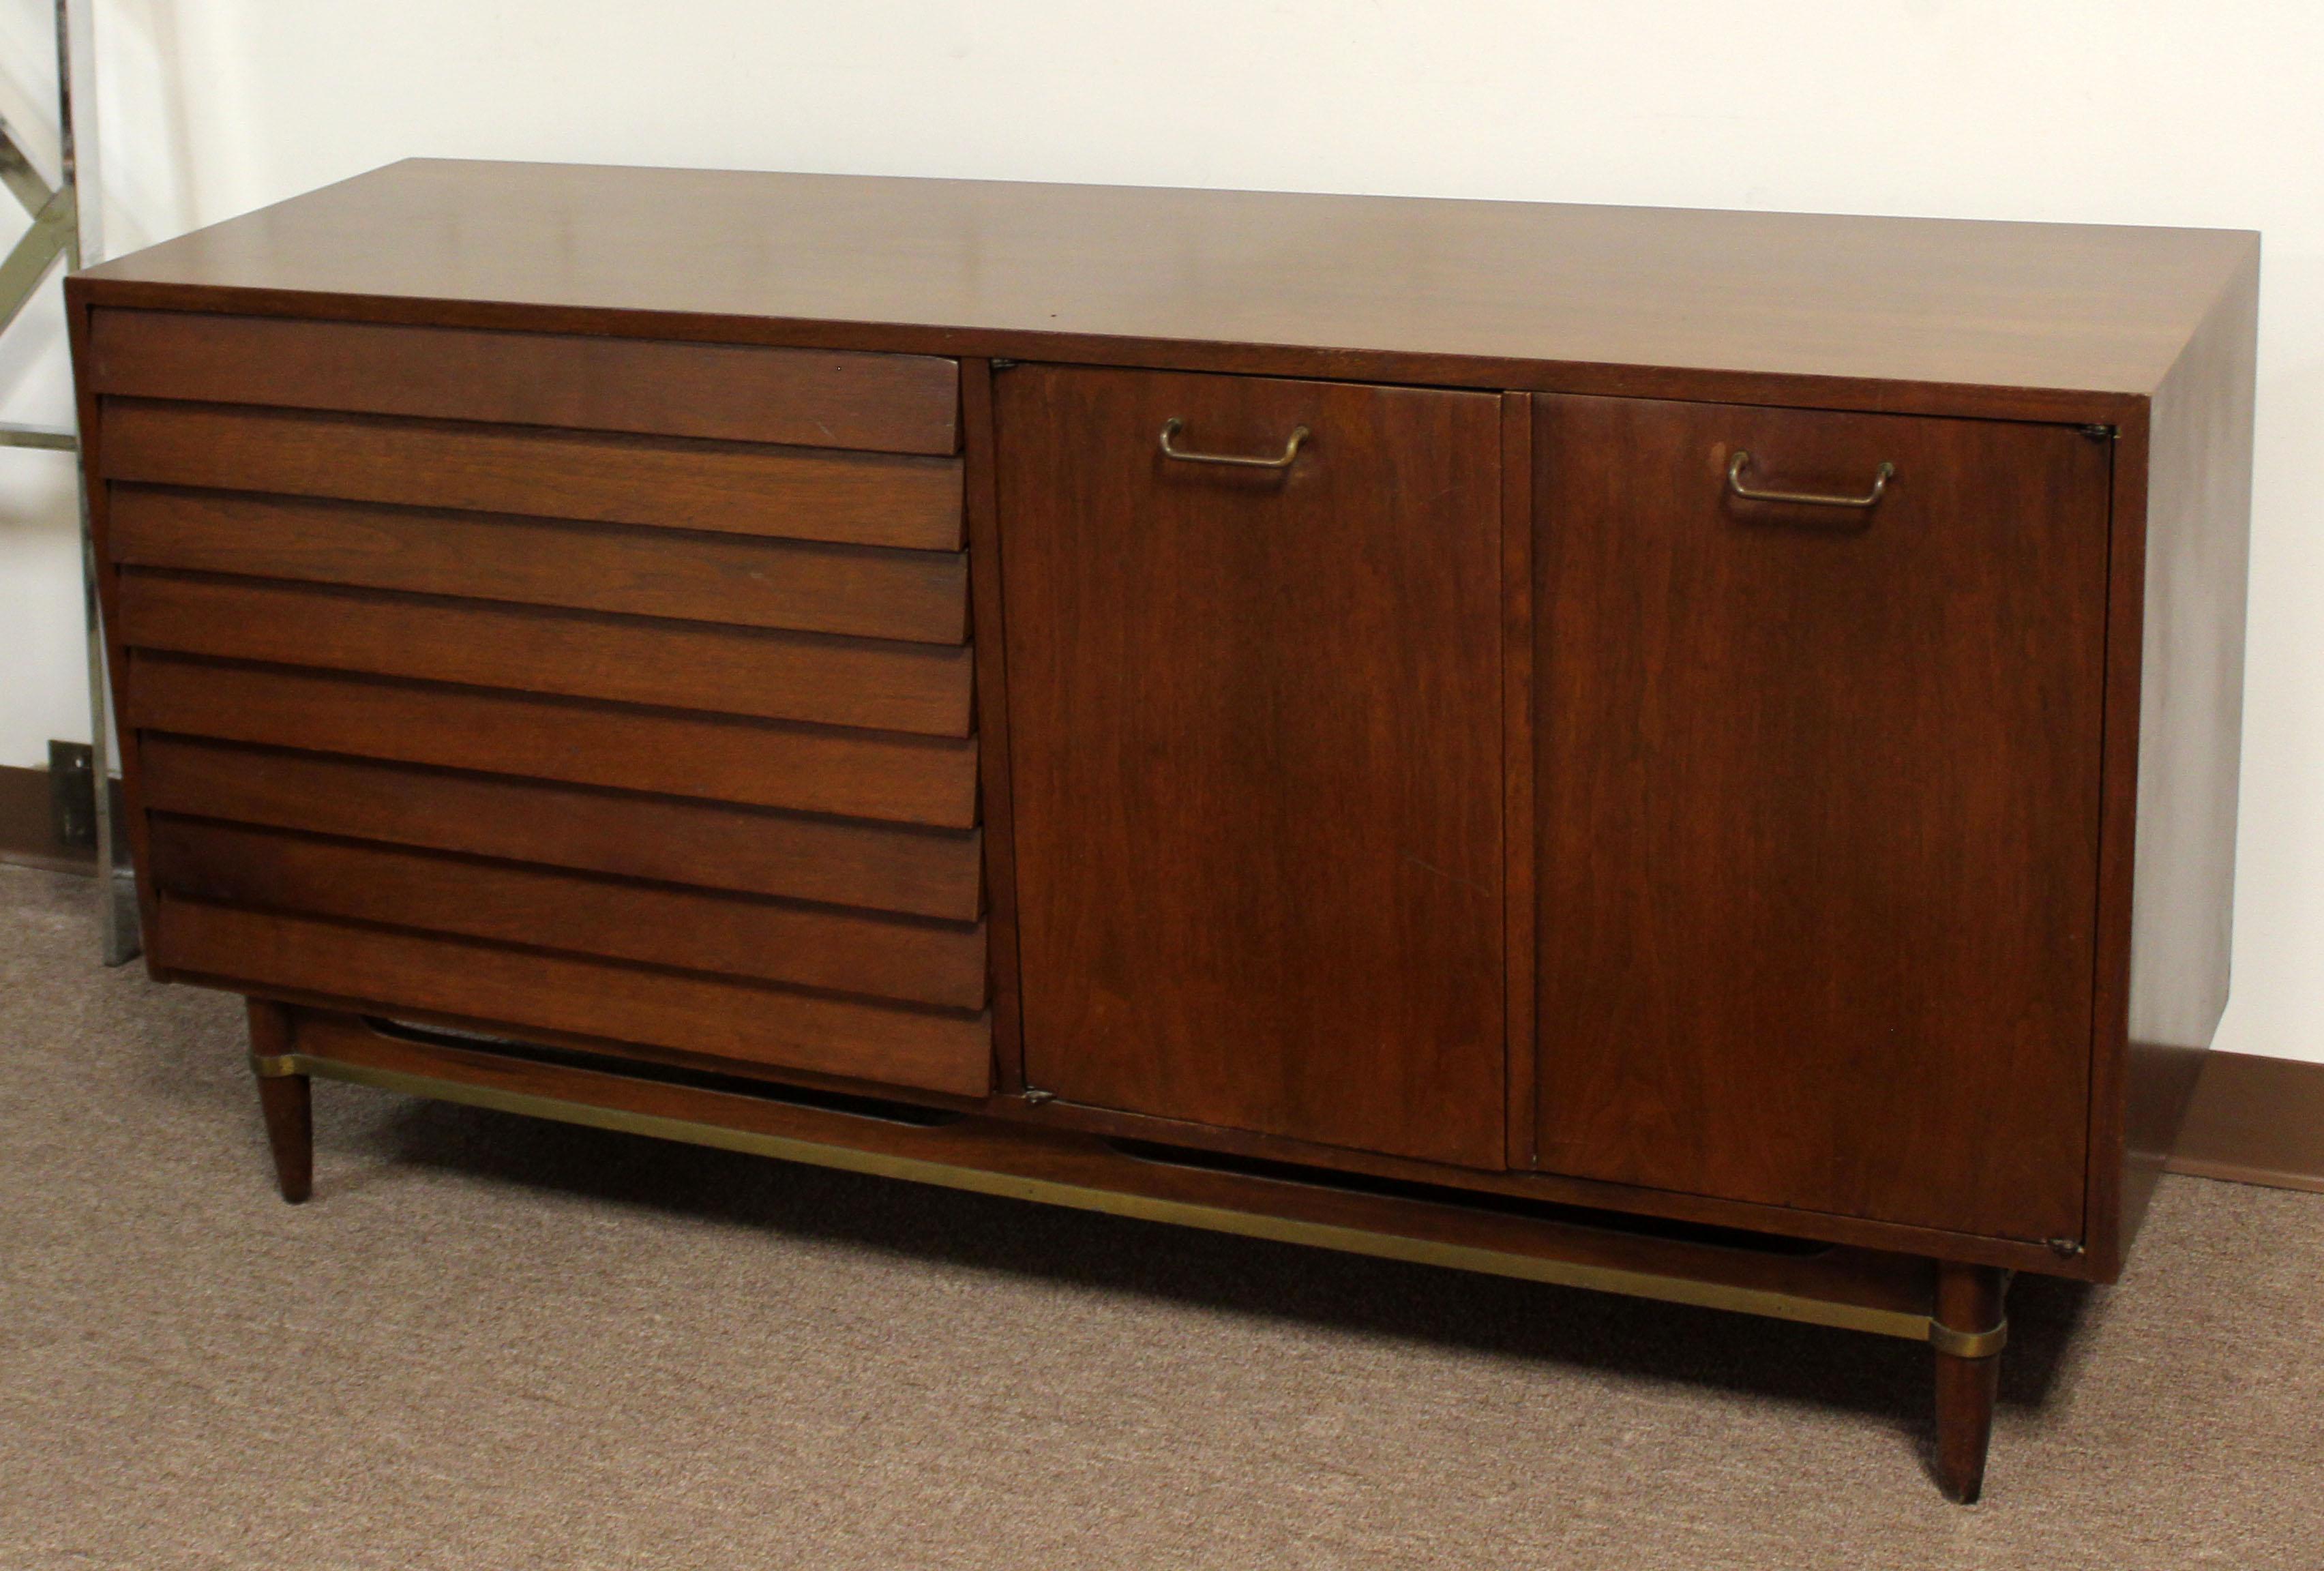 For your consideration is a wonderful, walnut dresser, with six drawers, by Merton Gershun for American of Martinsville, circa the 1950s. In very good vintage condition. The dimensions of each are 60